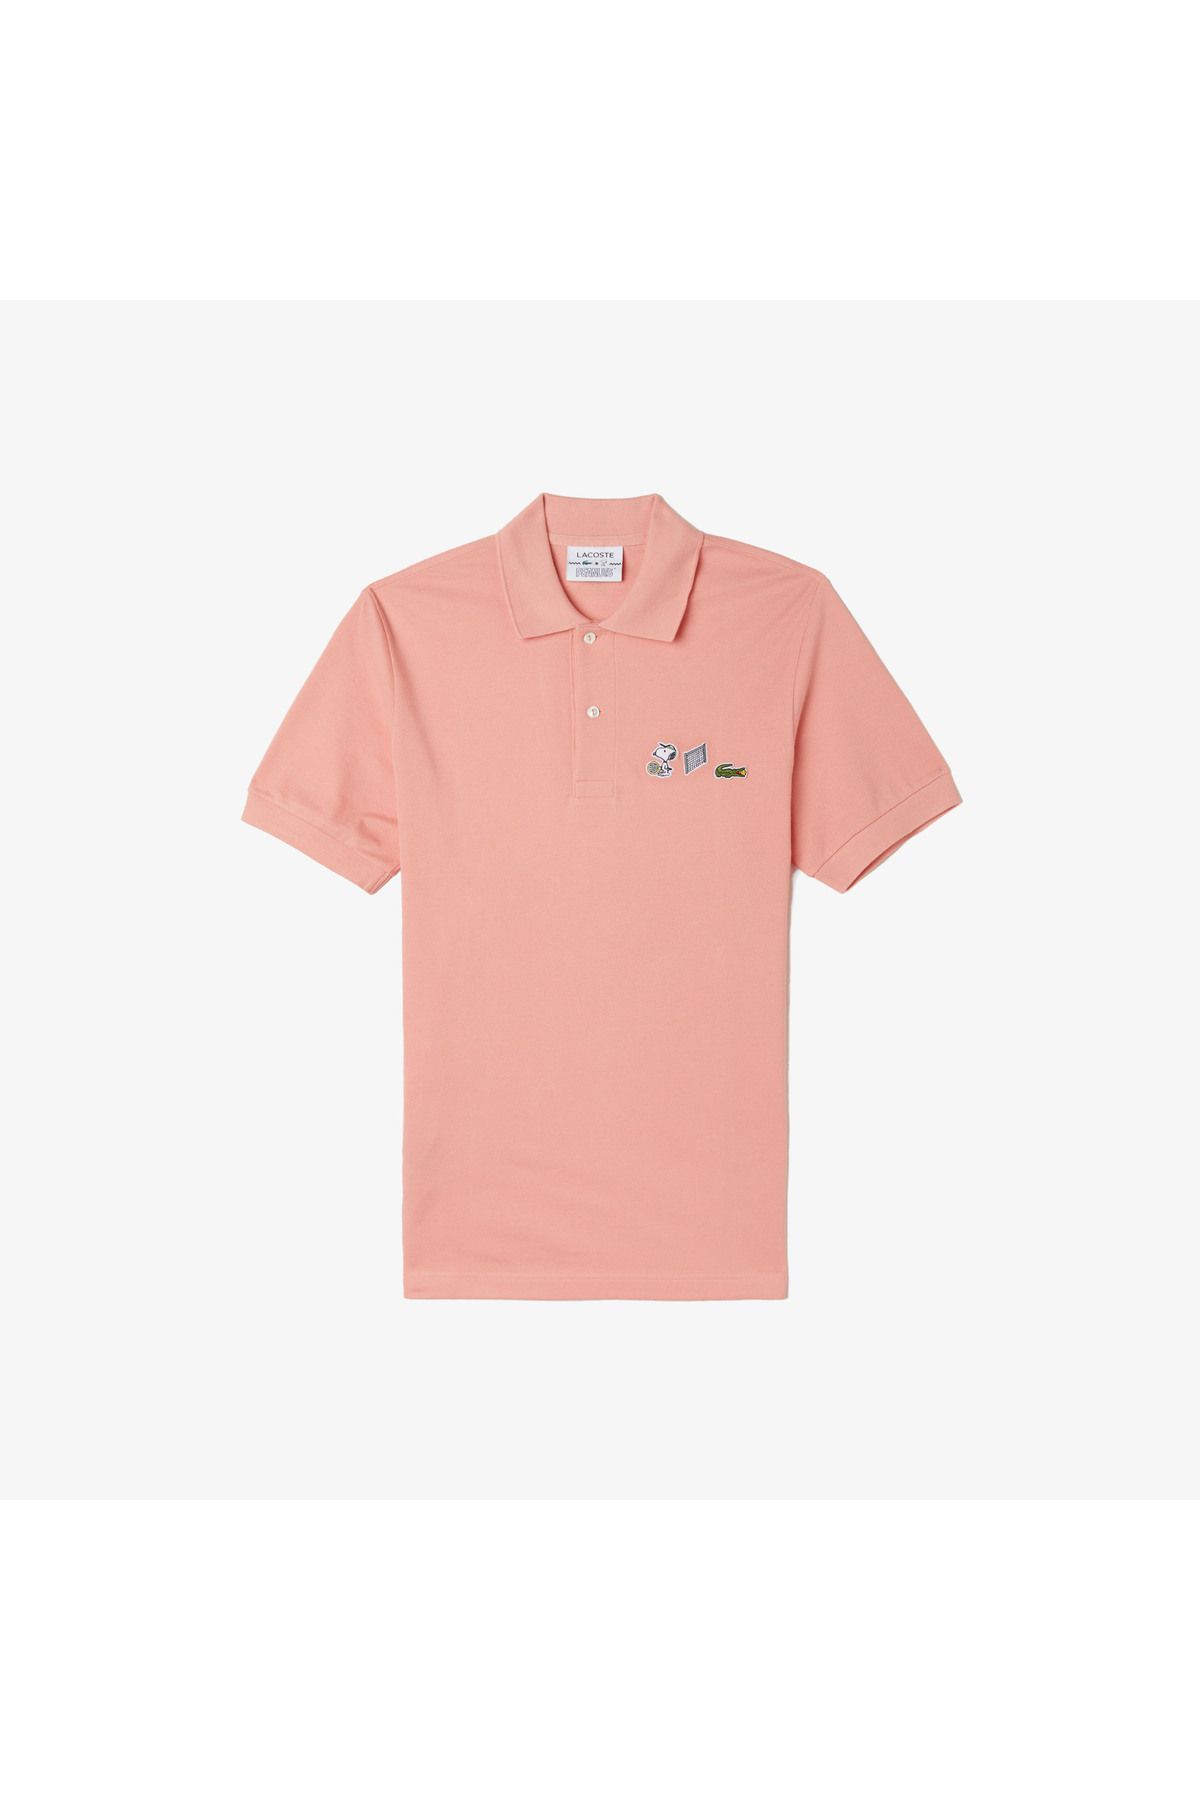 Lacoste Men's X Peanuts Relaxed Fit Organic Cotton Polo Shirt